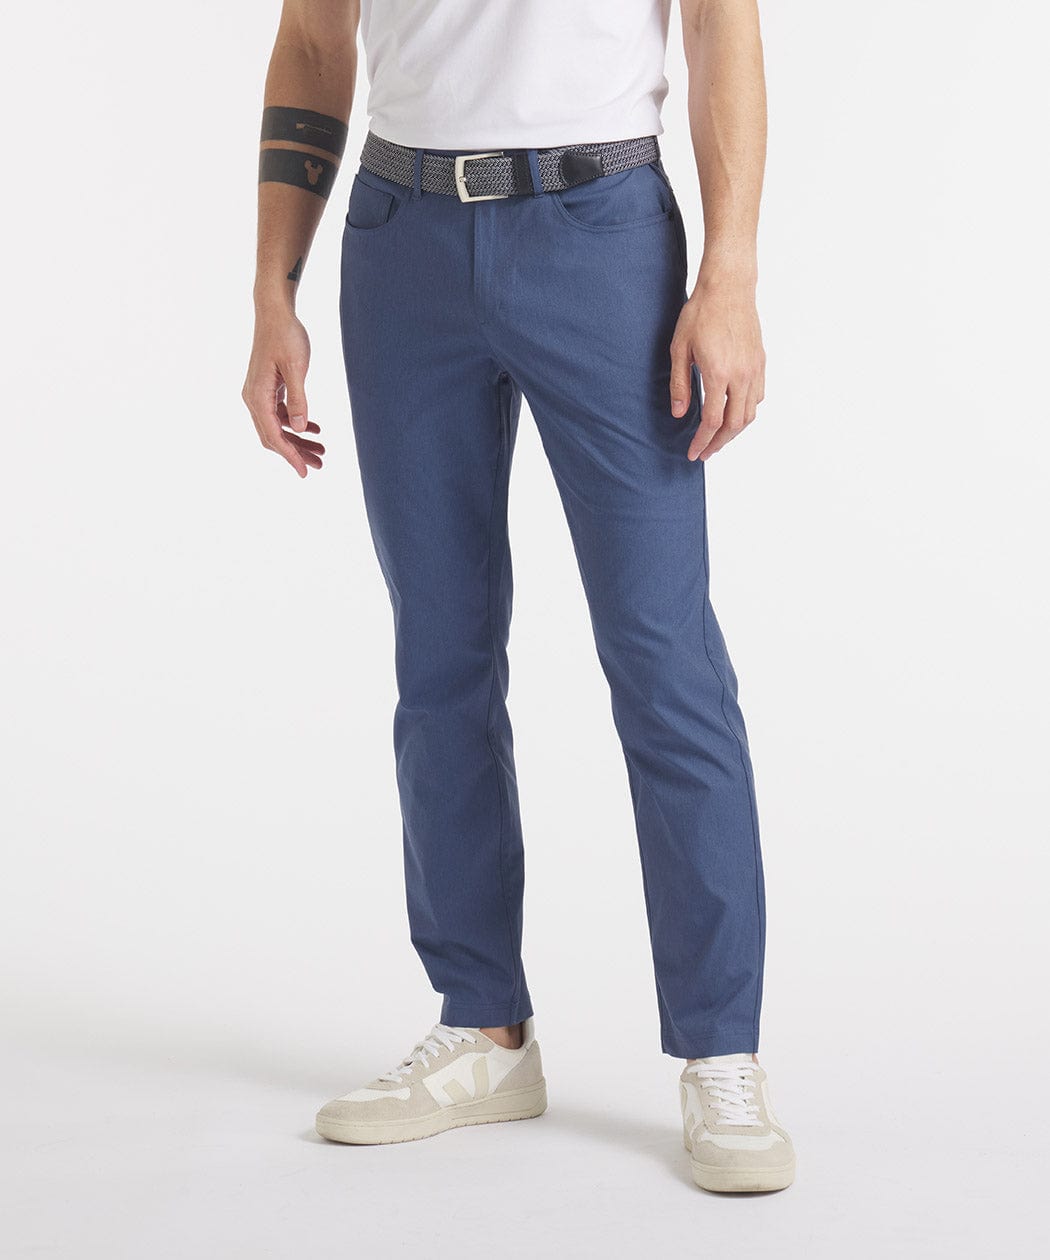 Chino Pants for Men | Todd Snyder